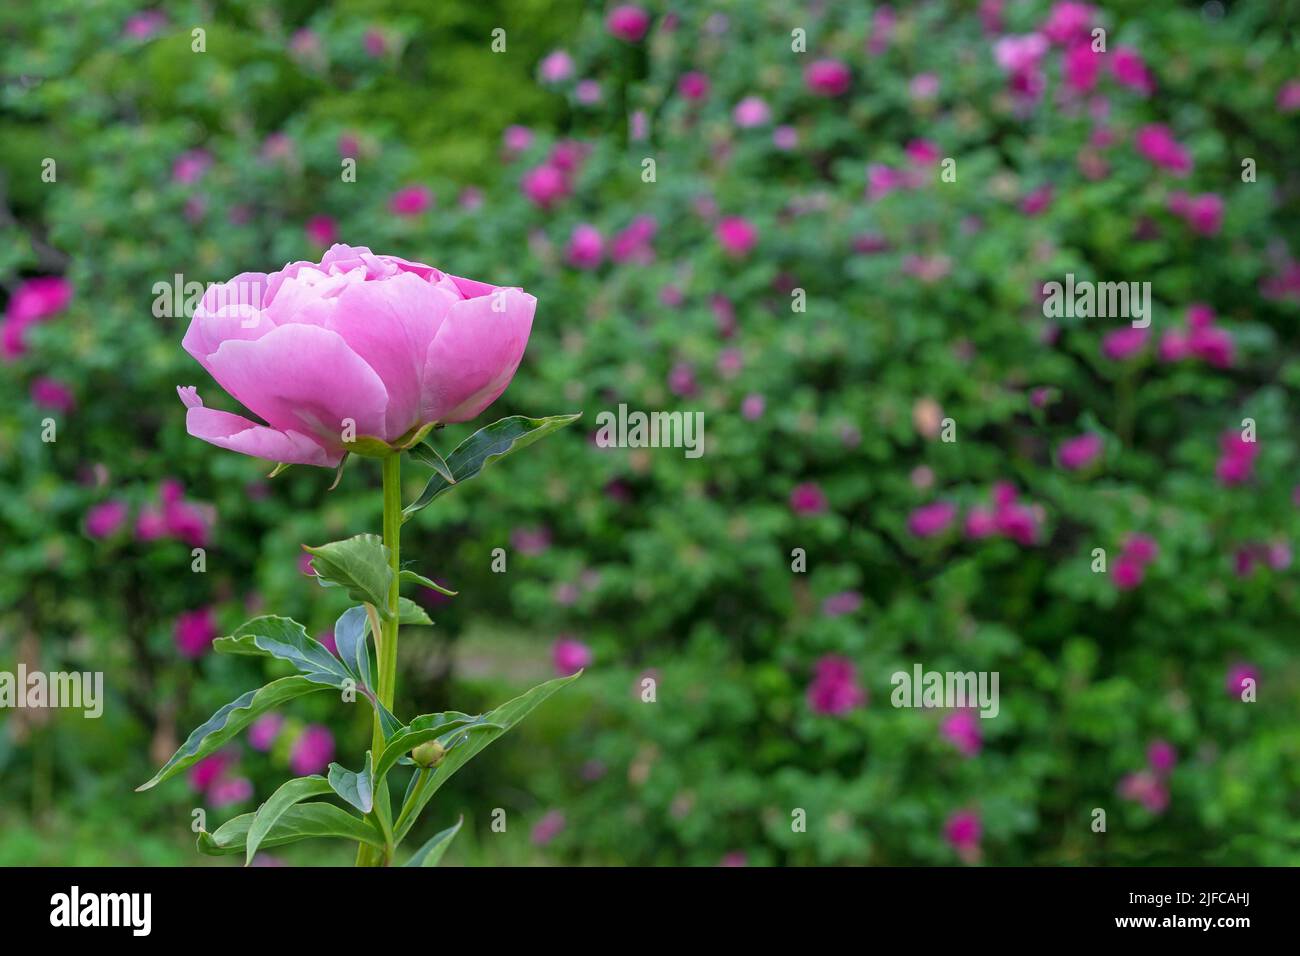 Pink peonies against the background of blooming wild rose bushes. Stock Photo